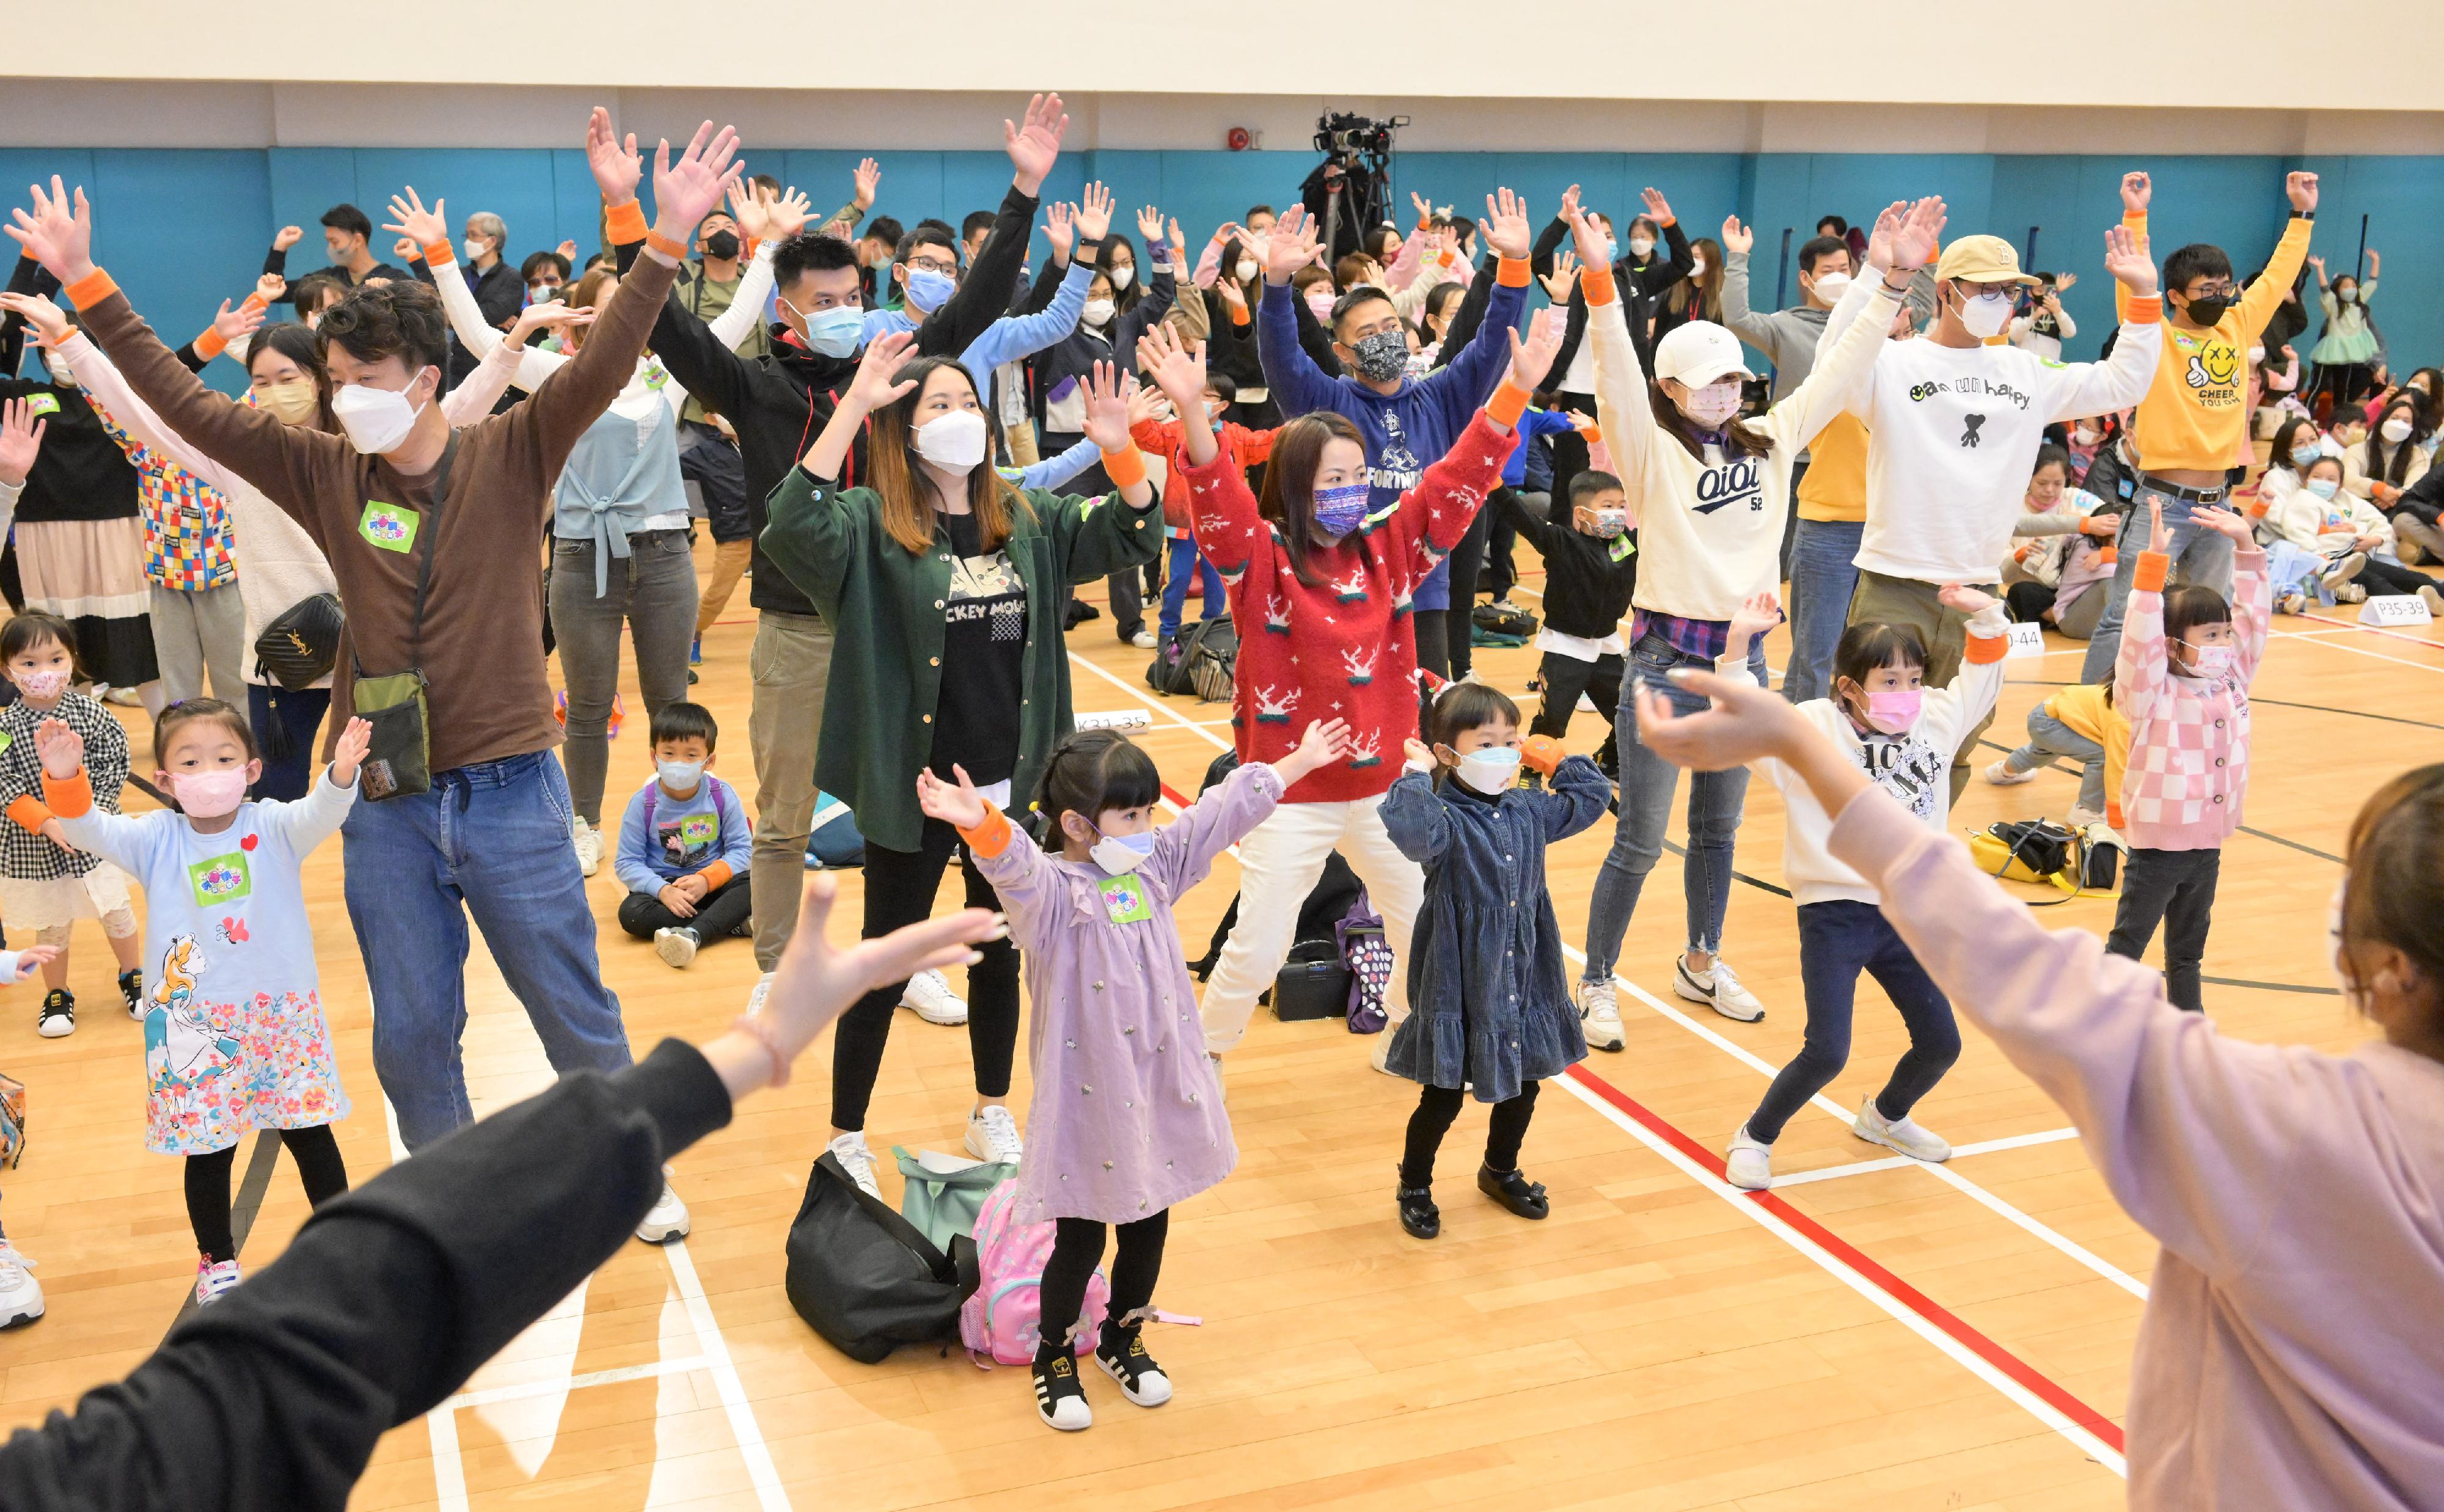 Parents and children learn dance steps with different levels of difficulty at the Play with Your Children Day today (December 11).